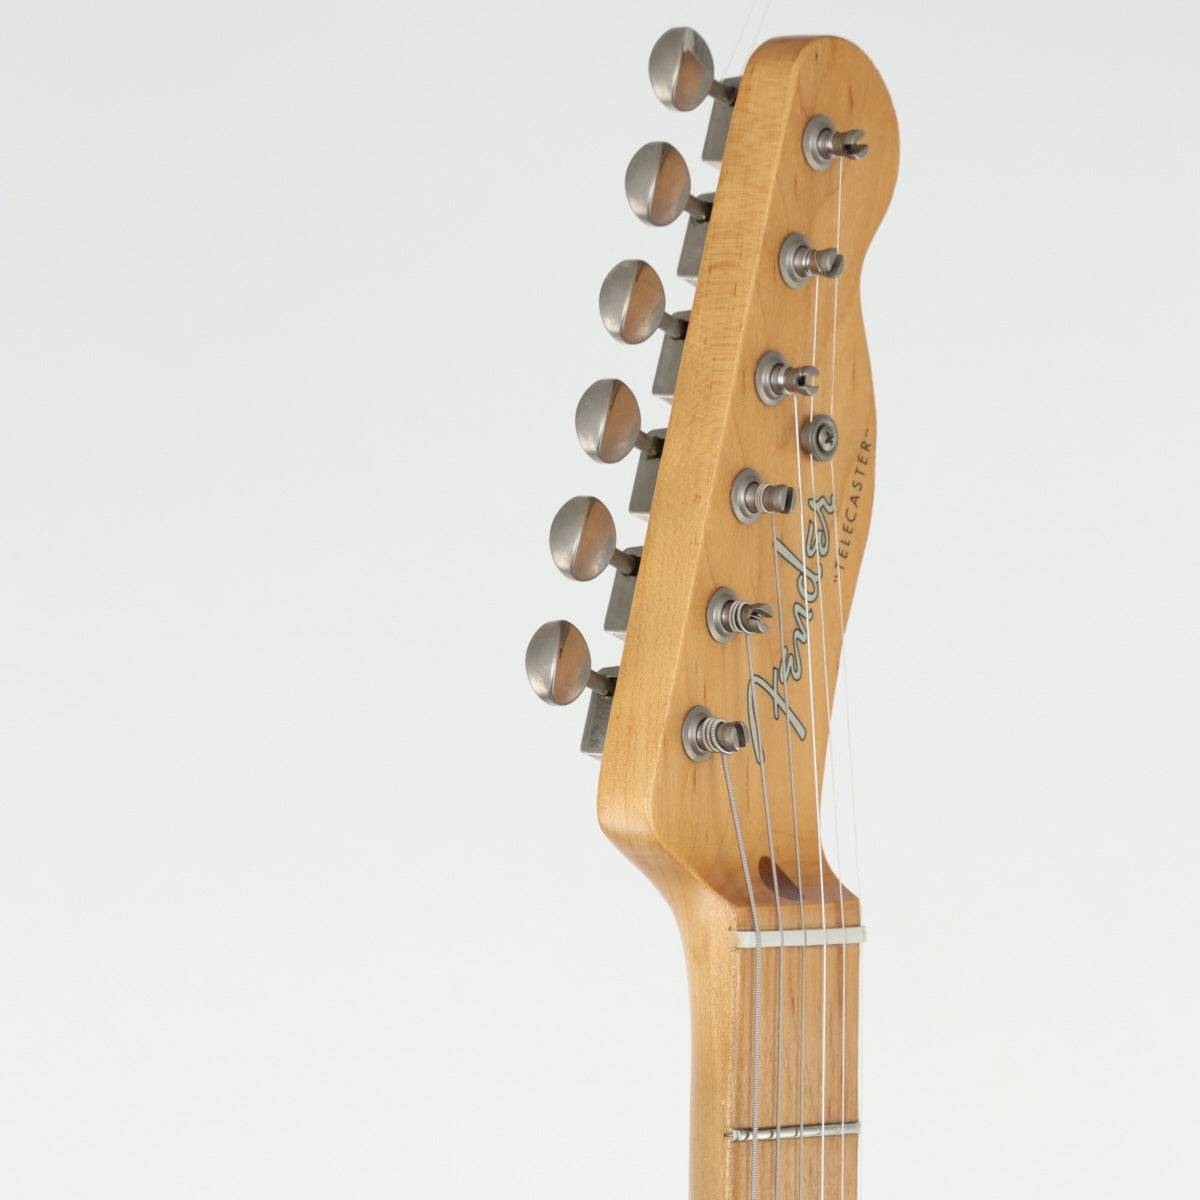 [SN MX14488141] USED Fender Mexico Fender Mexico / Road Worn 50s Telecaster Vintage Blonde [20]